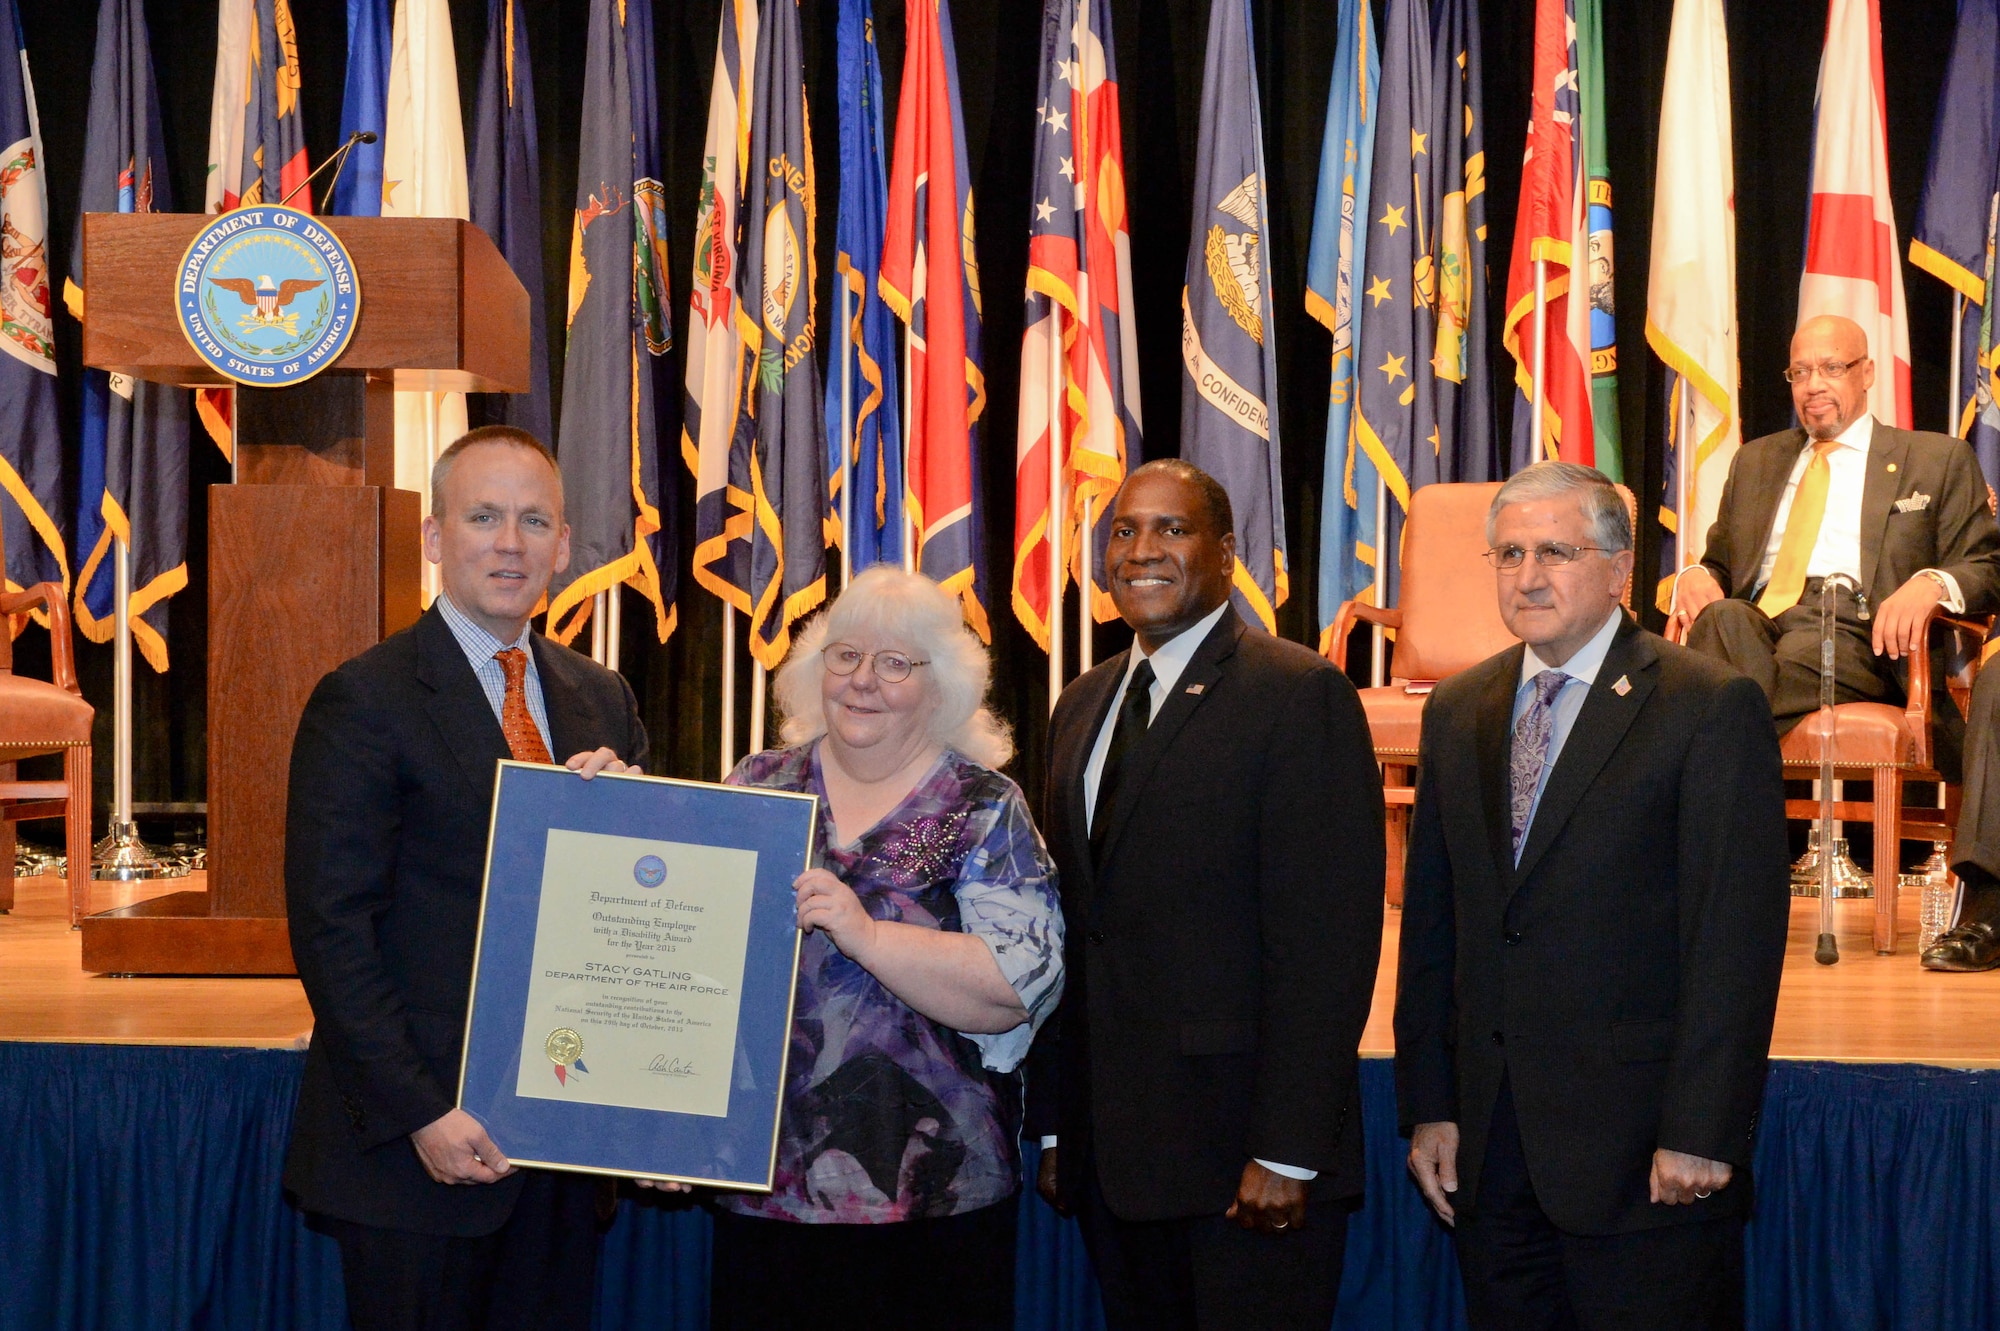 Brad Carson, the acting undersecretary of defense for personnel and readiness, presents Stacy Gatling, the Directed Energy Directorate executive secretary at the Air Force Research Laboratory on Kirtland Air Force Base, N.M., with a secretary of defense award to outstanding civilian and service members with disabilities during a ceremony at the Pentagon Oct. 29, 2015. (U.S. Army photo/Sgt. Courtney Russell)